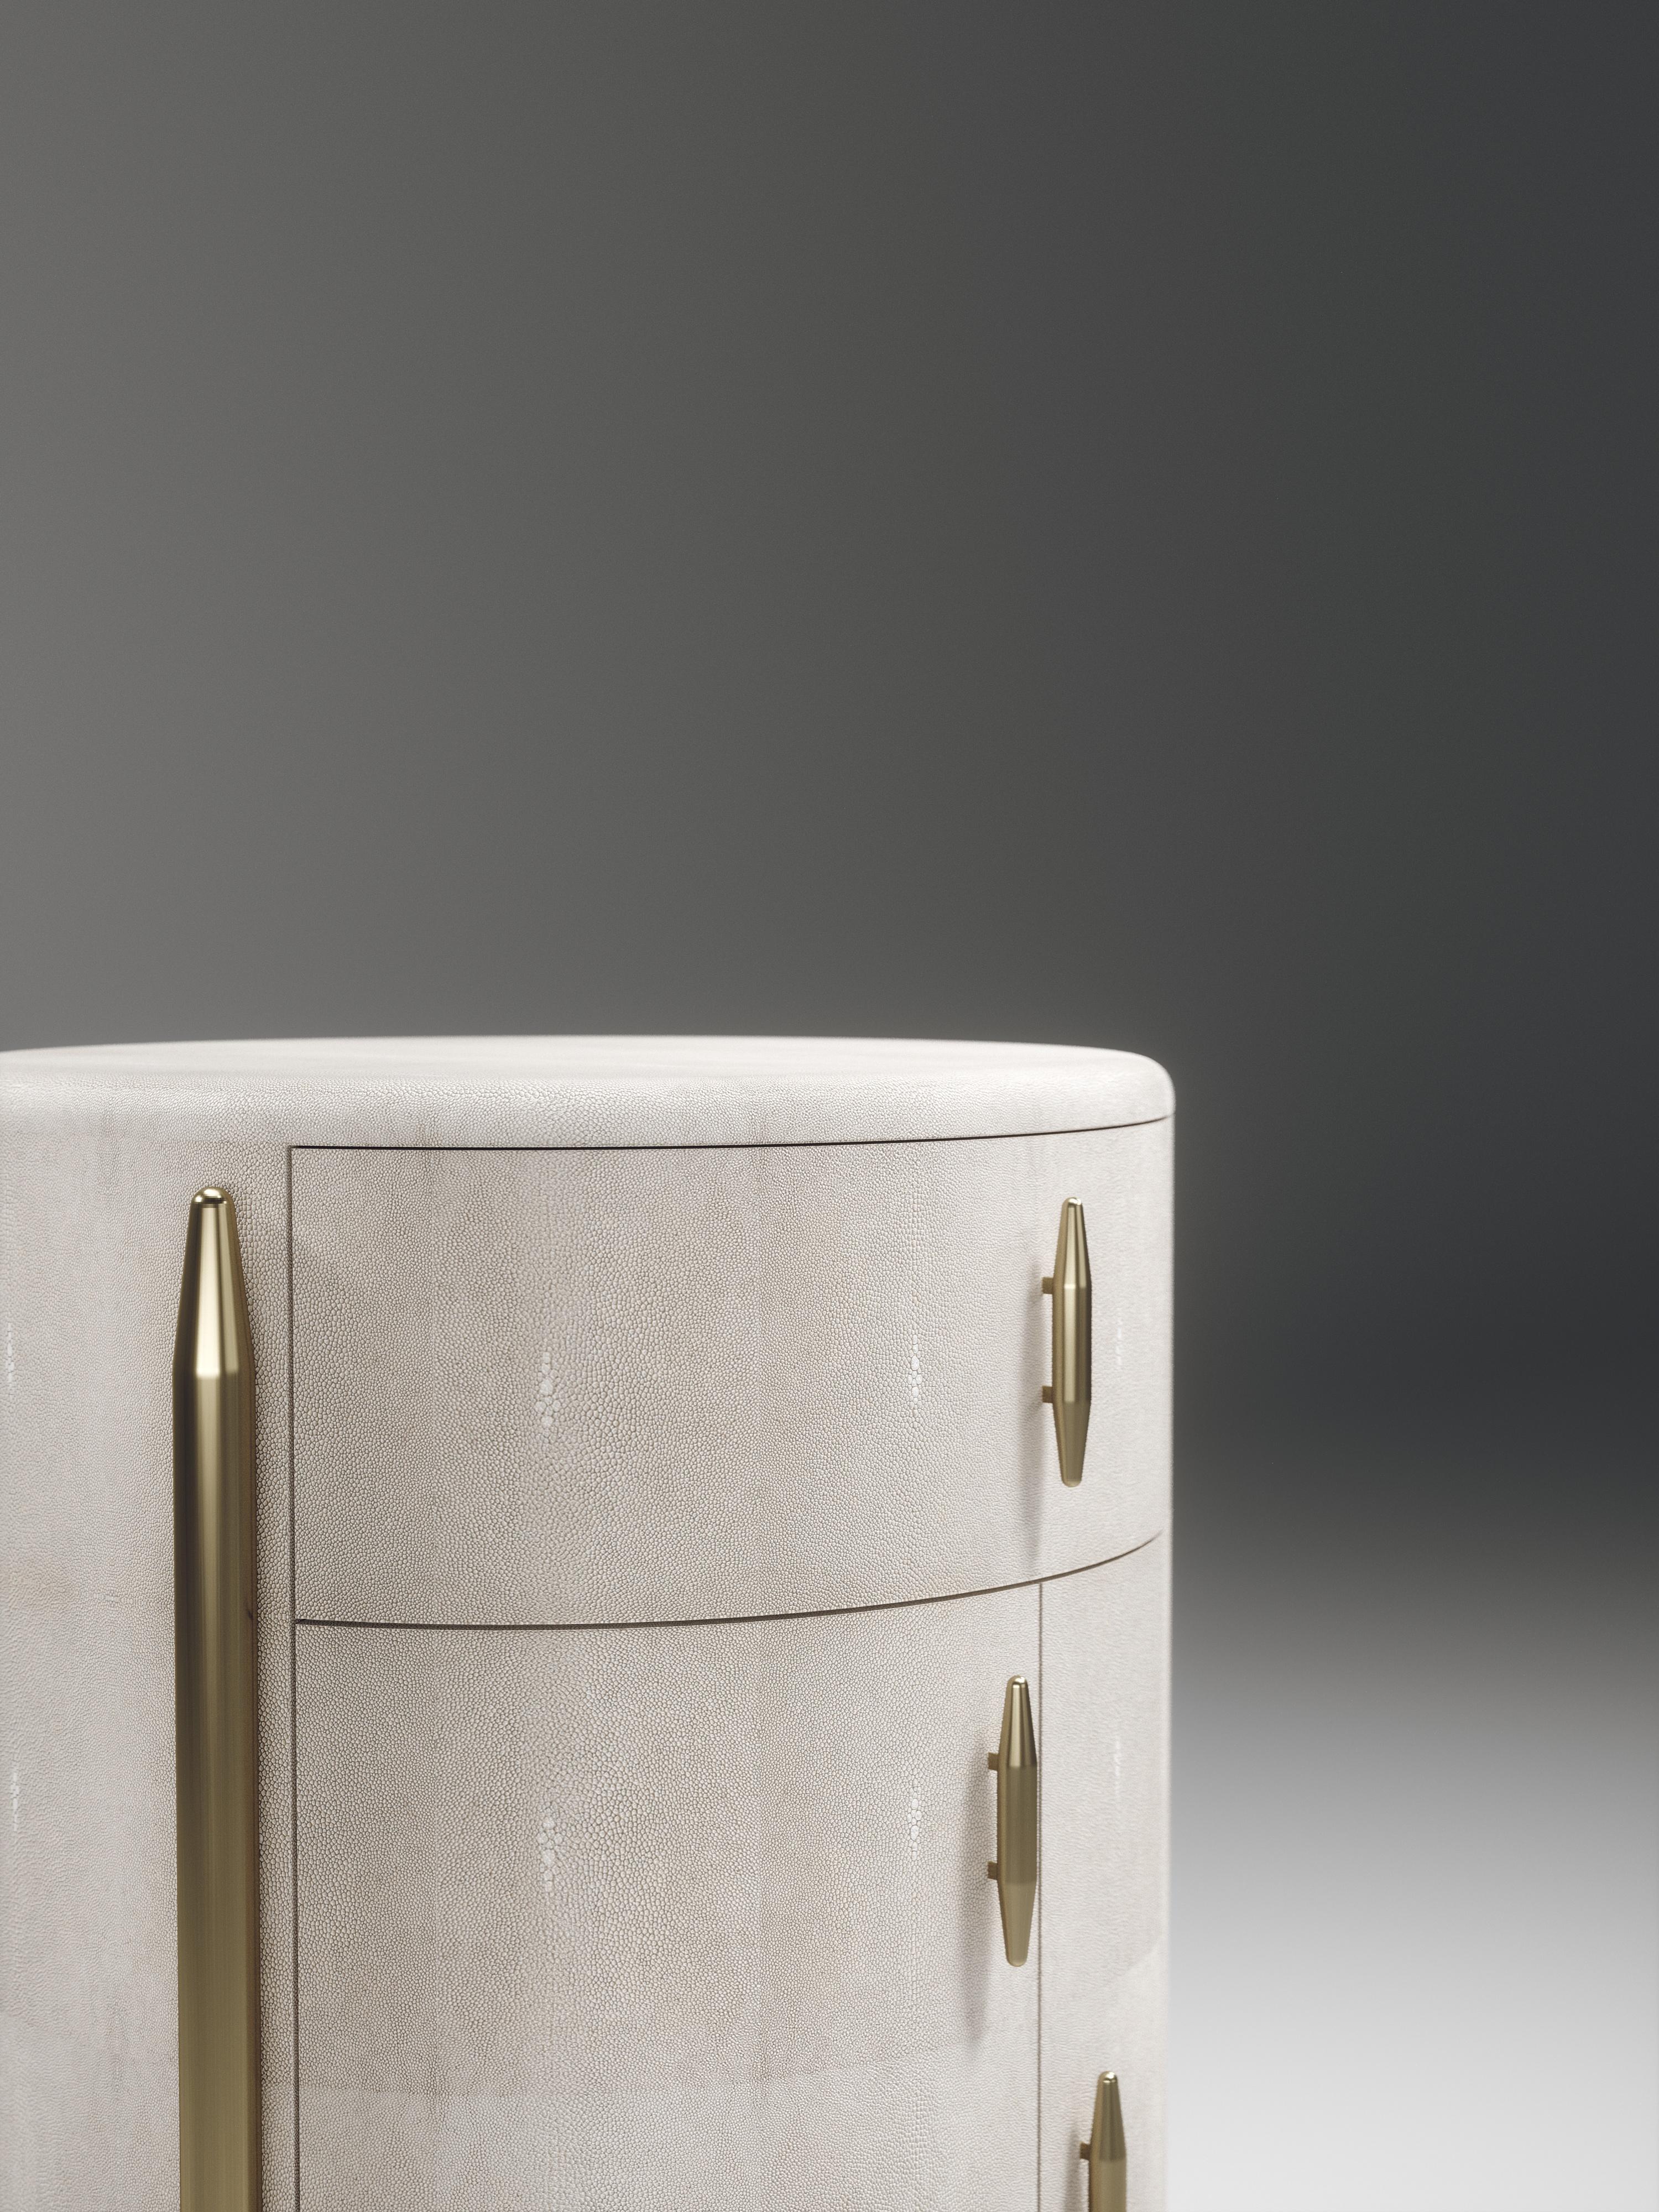 The Pair of dandy round bedside tables by Kifu Paris are elegant and luxurious home accents, inlaid in cream shagreen with bronze-patina brass details. This piece includes 1 drawer total and a cabinet below; the interiors are inlaid in gemelina wood